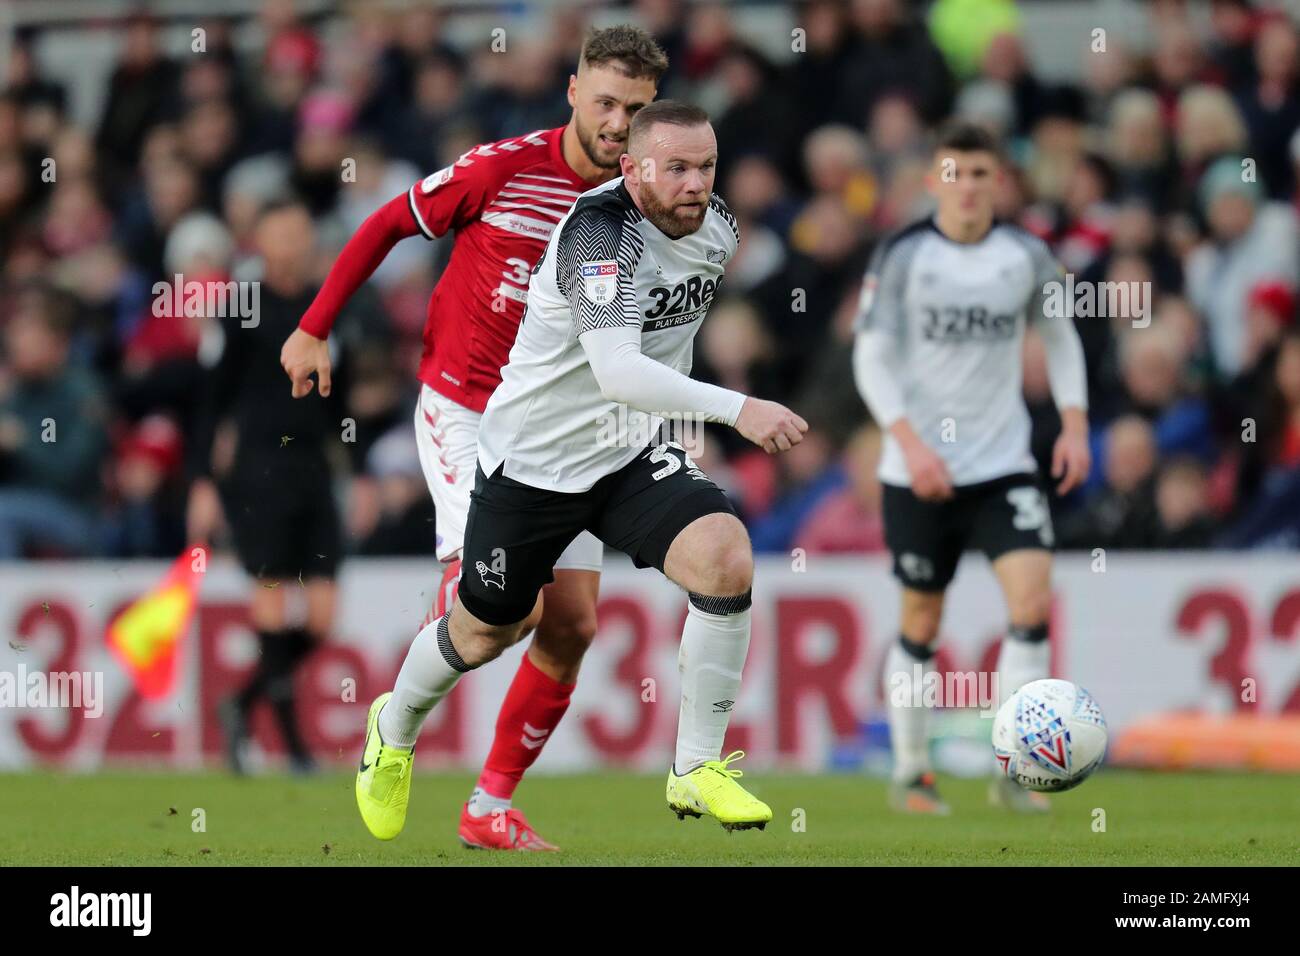 WING, ROONEY, MIDDLESBROUGH FC V DERBY COUNTY FC EFL CHAMPIONSHIP, 2020 Foto Stock